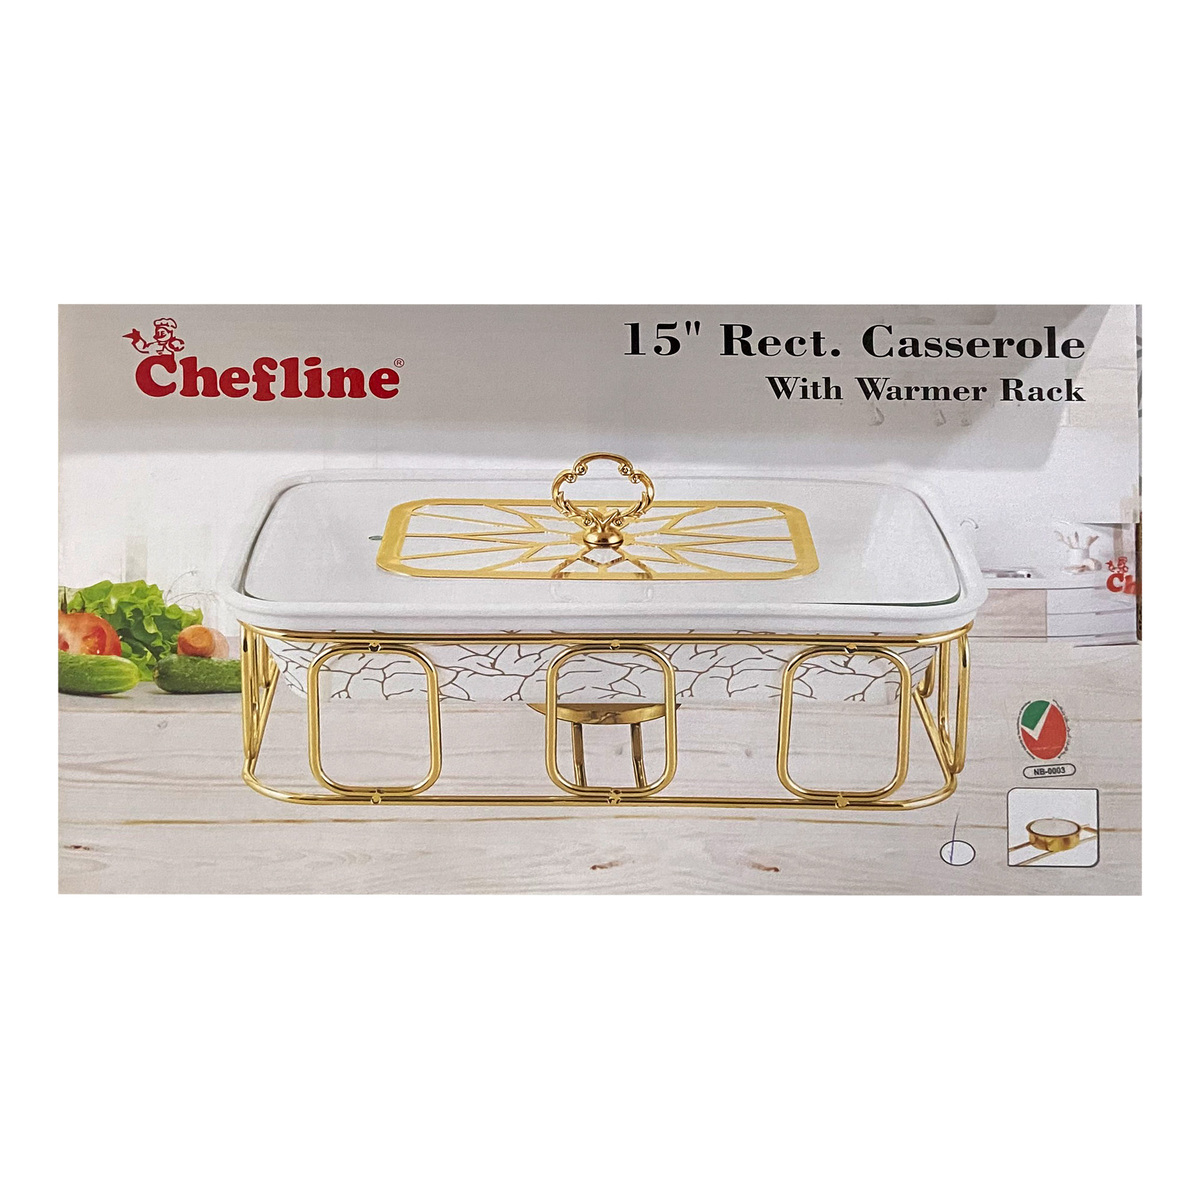 Chefline Rectangle Casserole with Warmer Rack, 15 inches, 3172